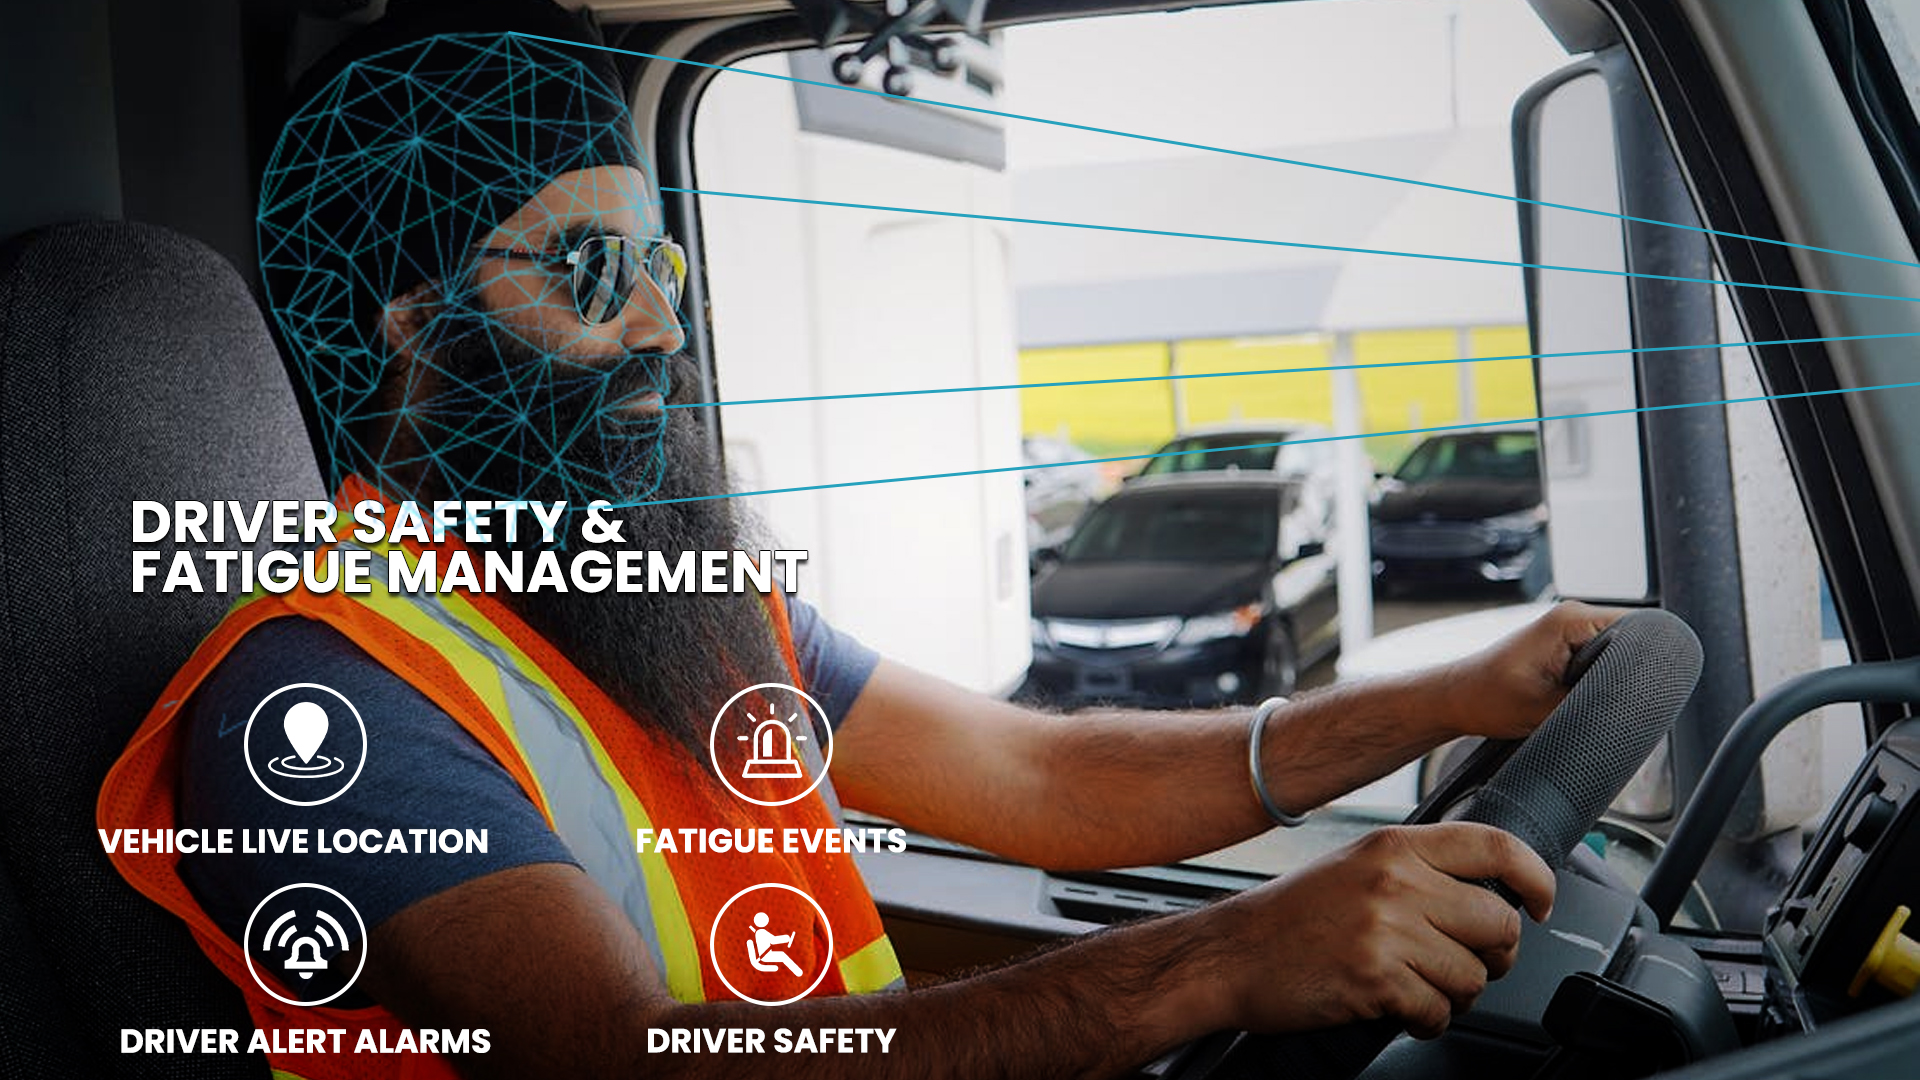 driver safety and fatigue management system by manage vehicle